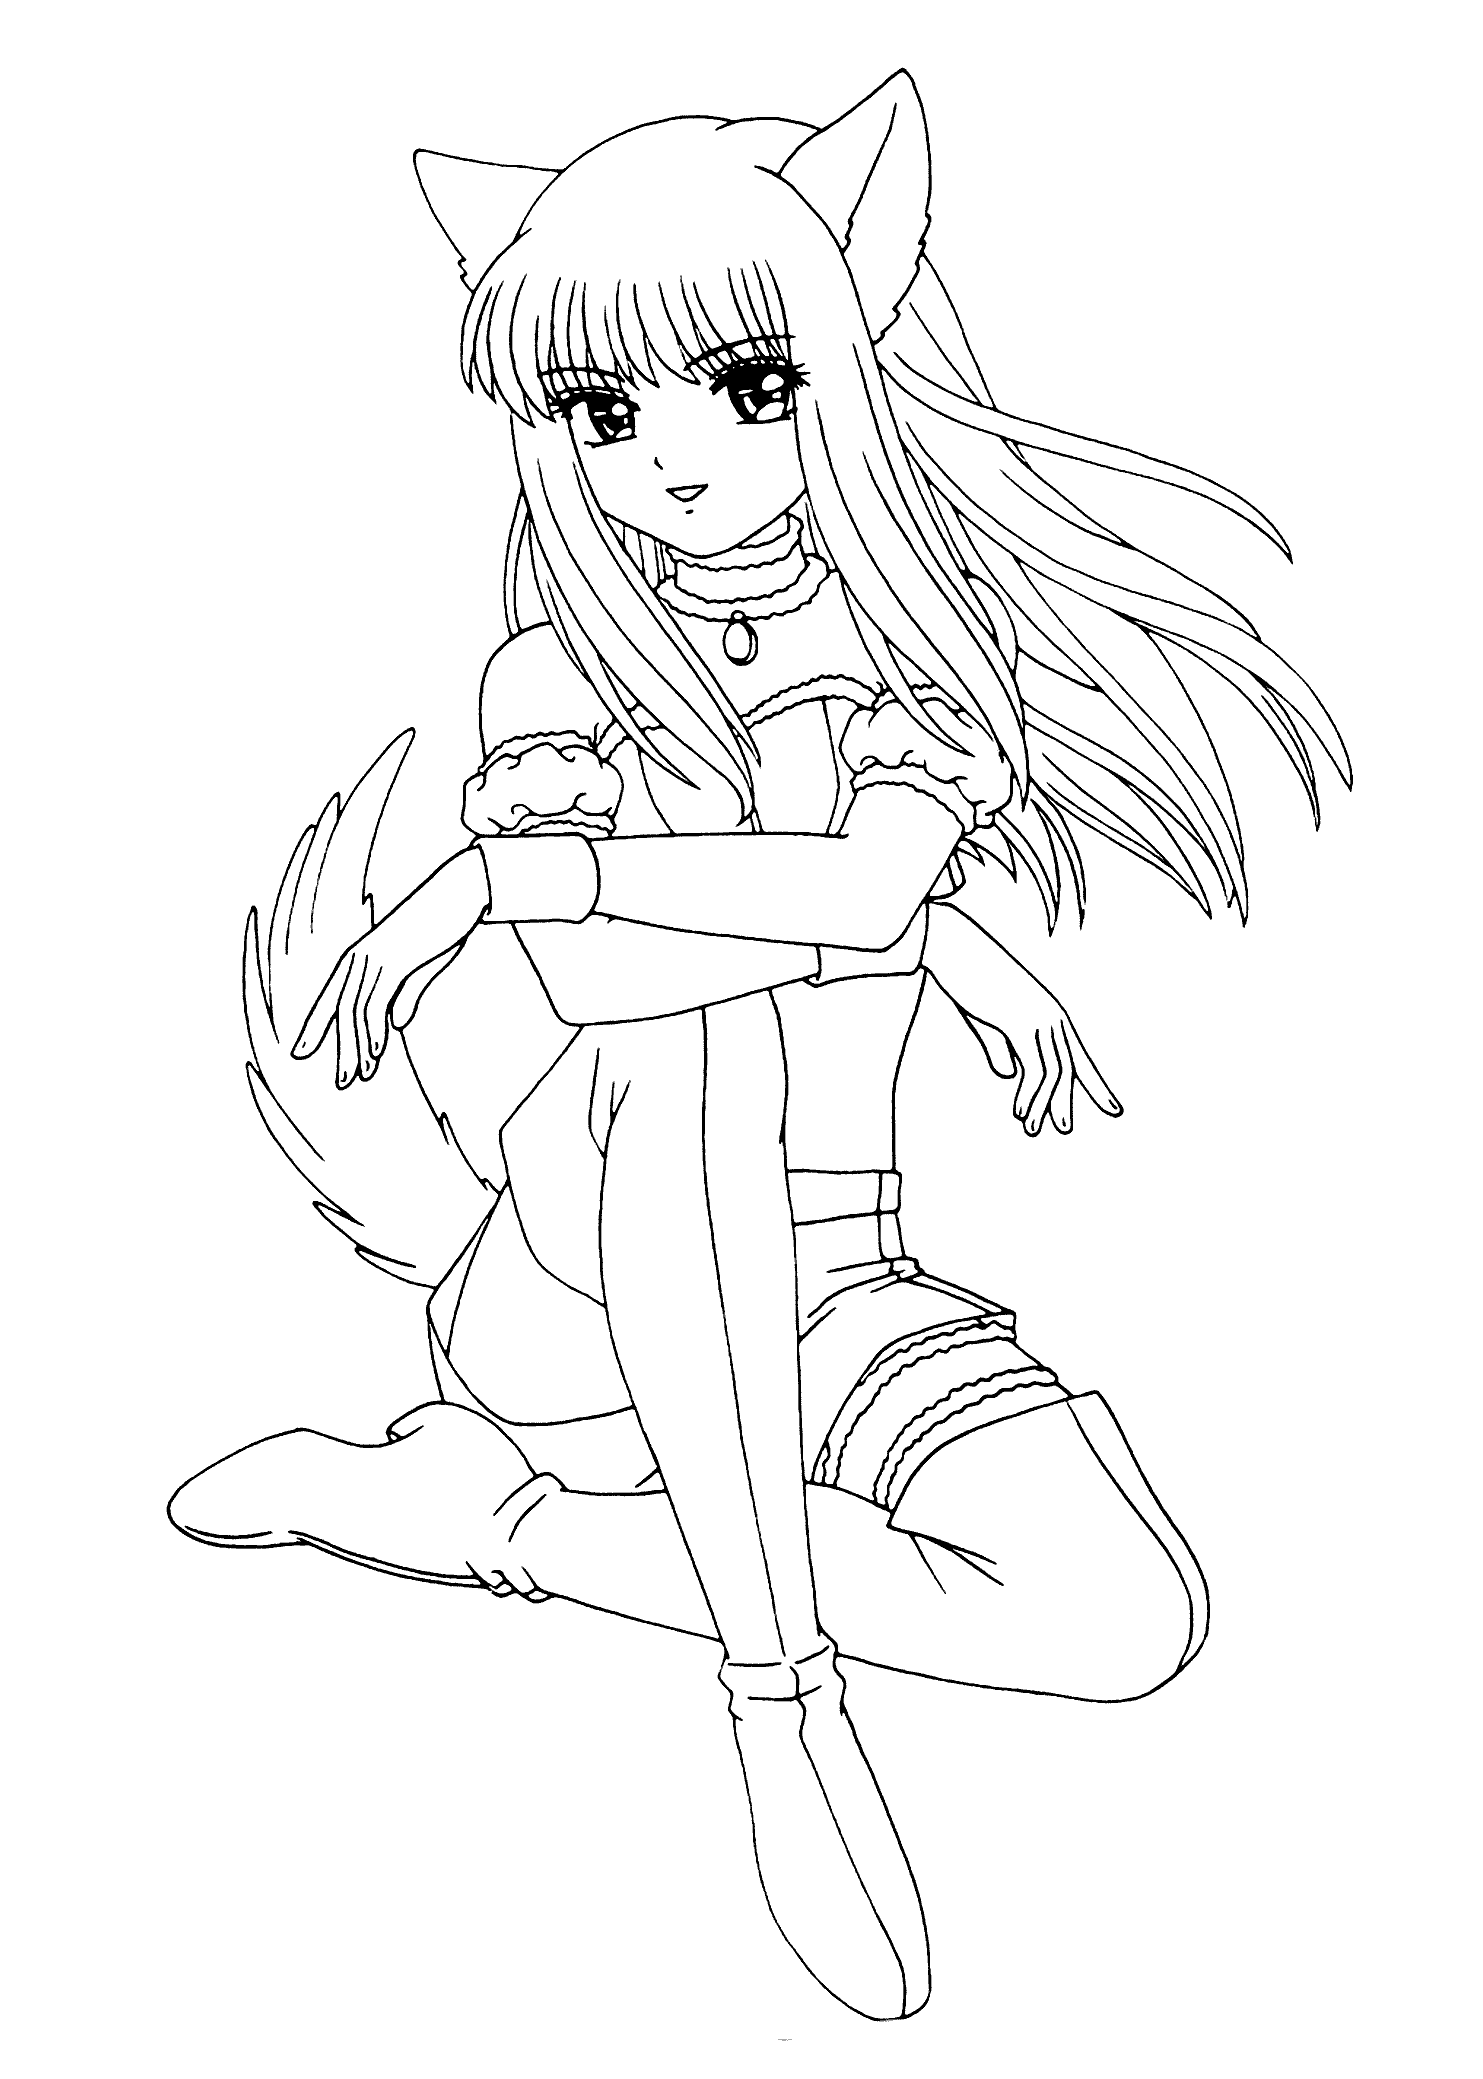 Anime Girls Coloring Page - Coloring Pages For All Ages - Coloring Home